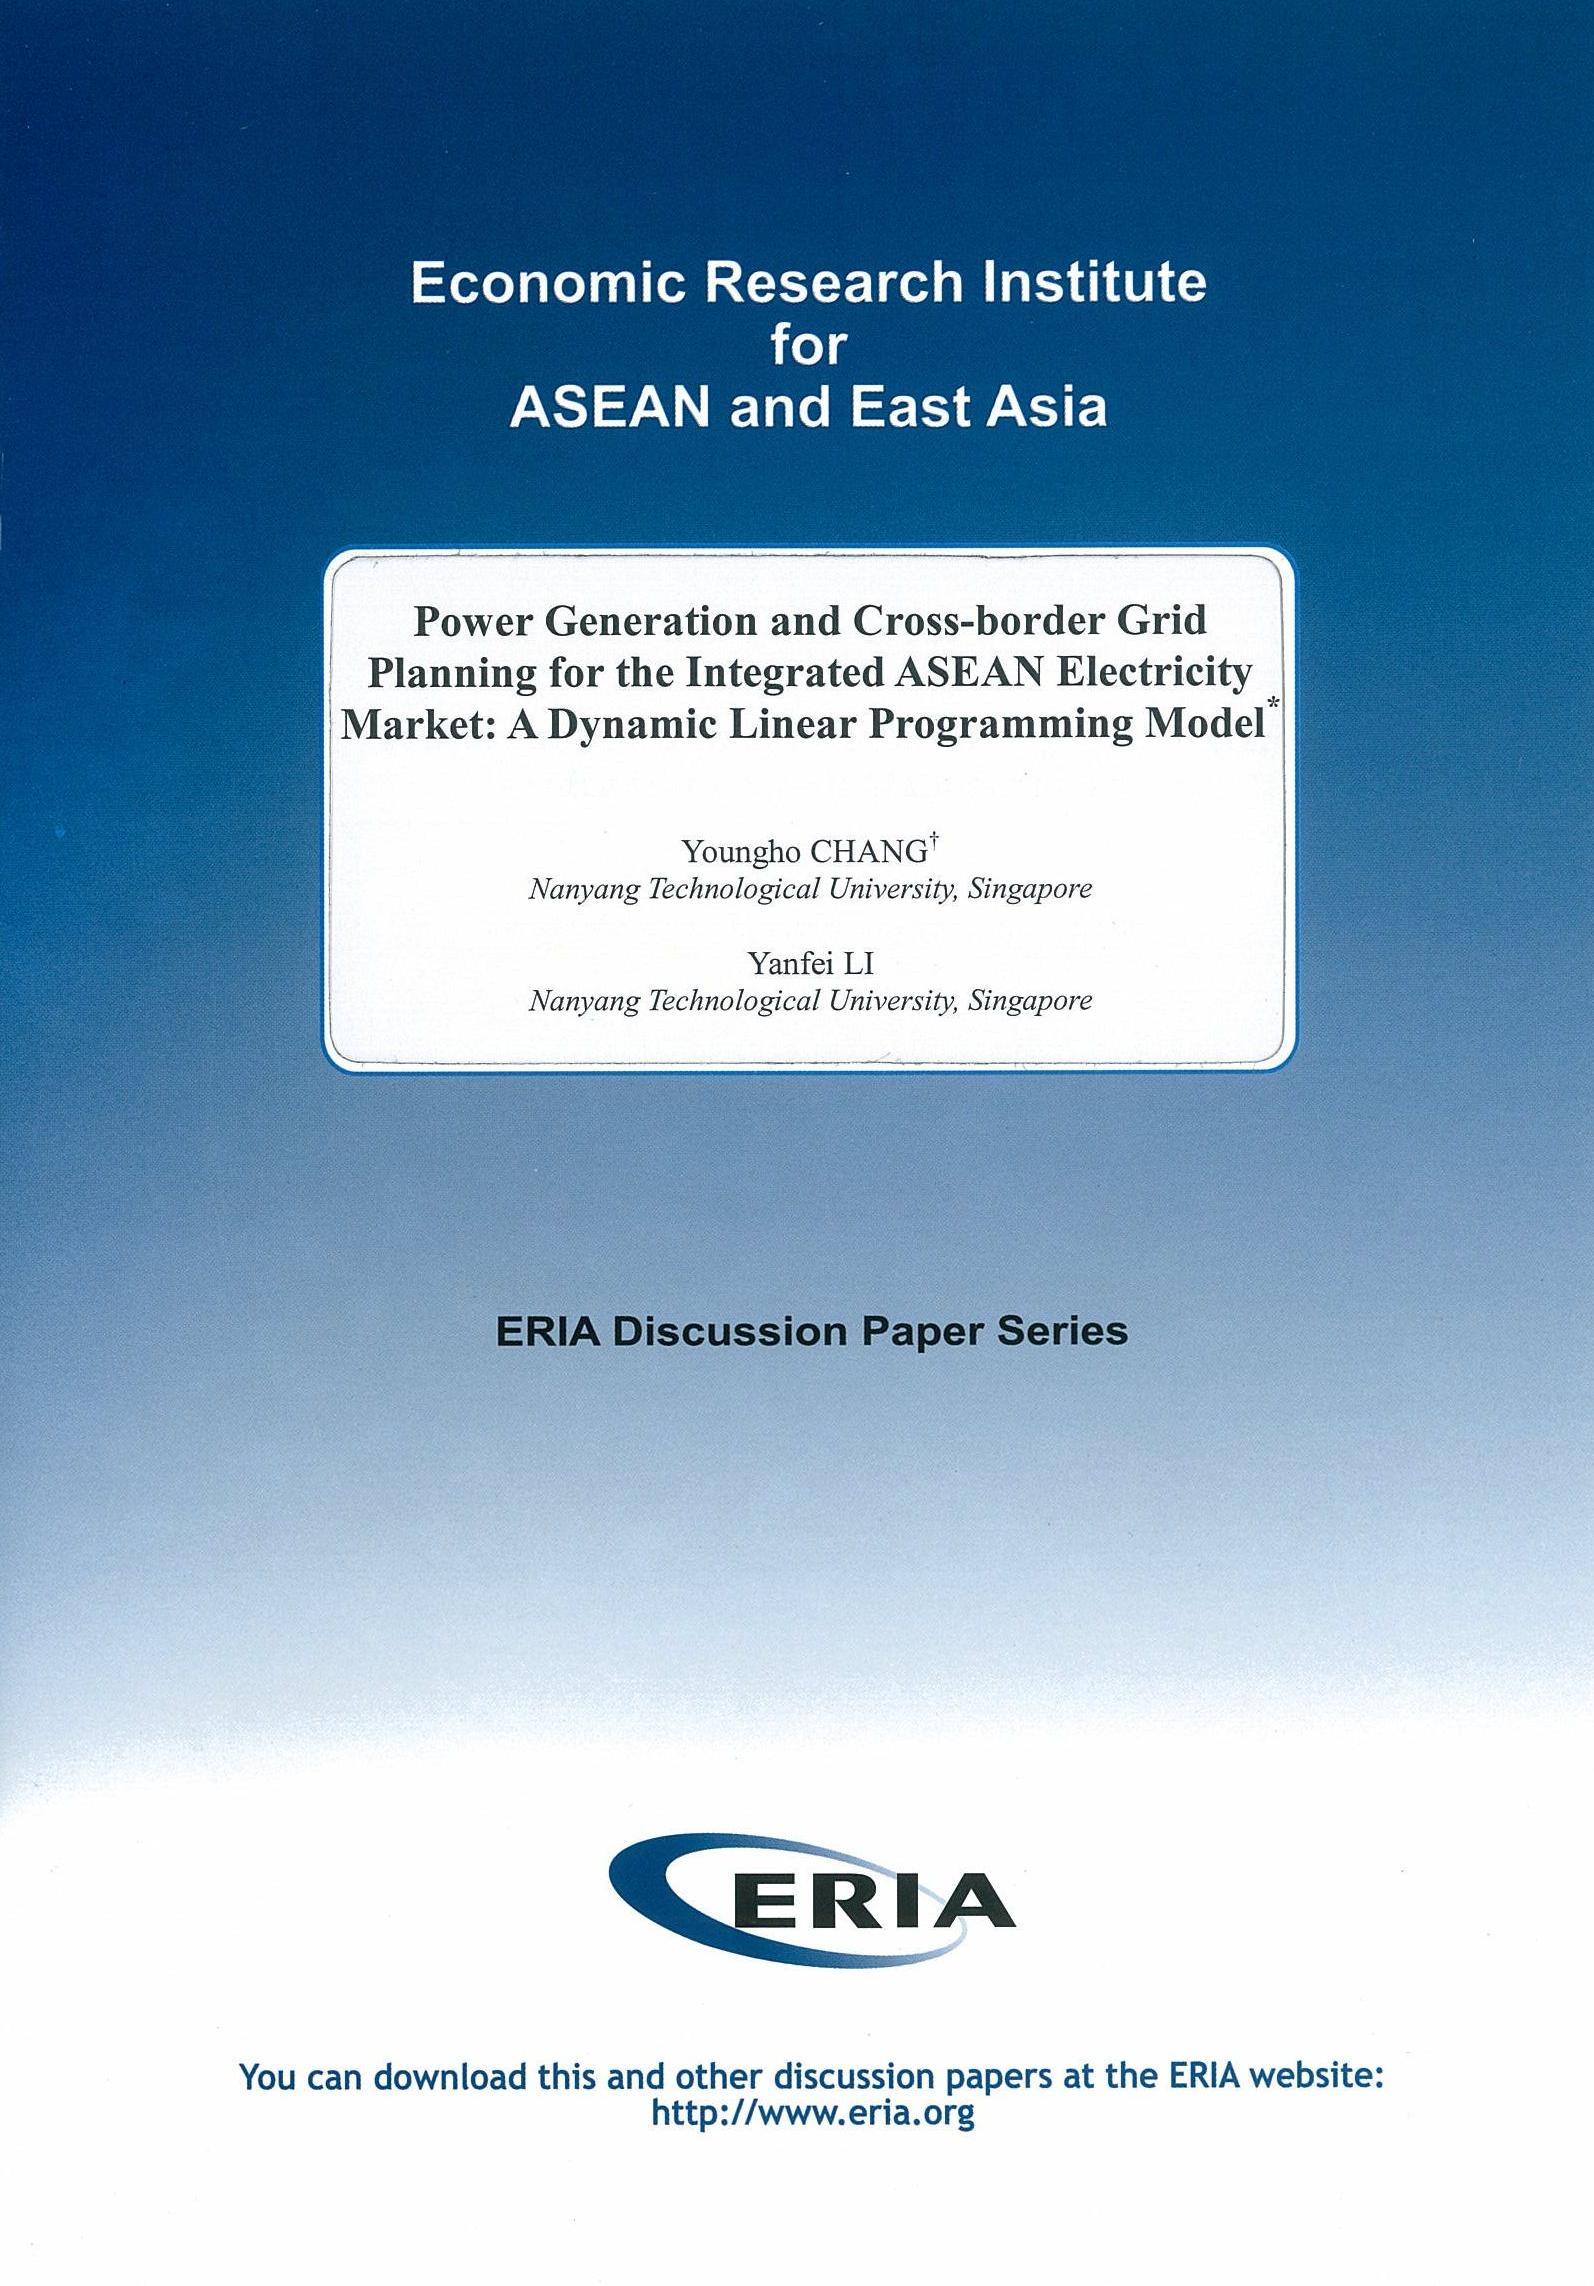 Power Generation and Cross-border Grid Planning for the Integrated ASEAN Electricity Market: A Dynamic Linear Programming Model